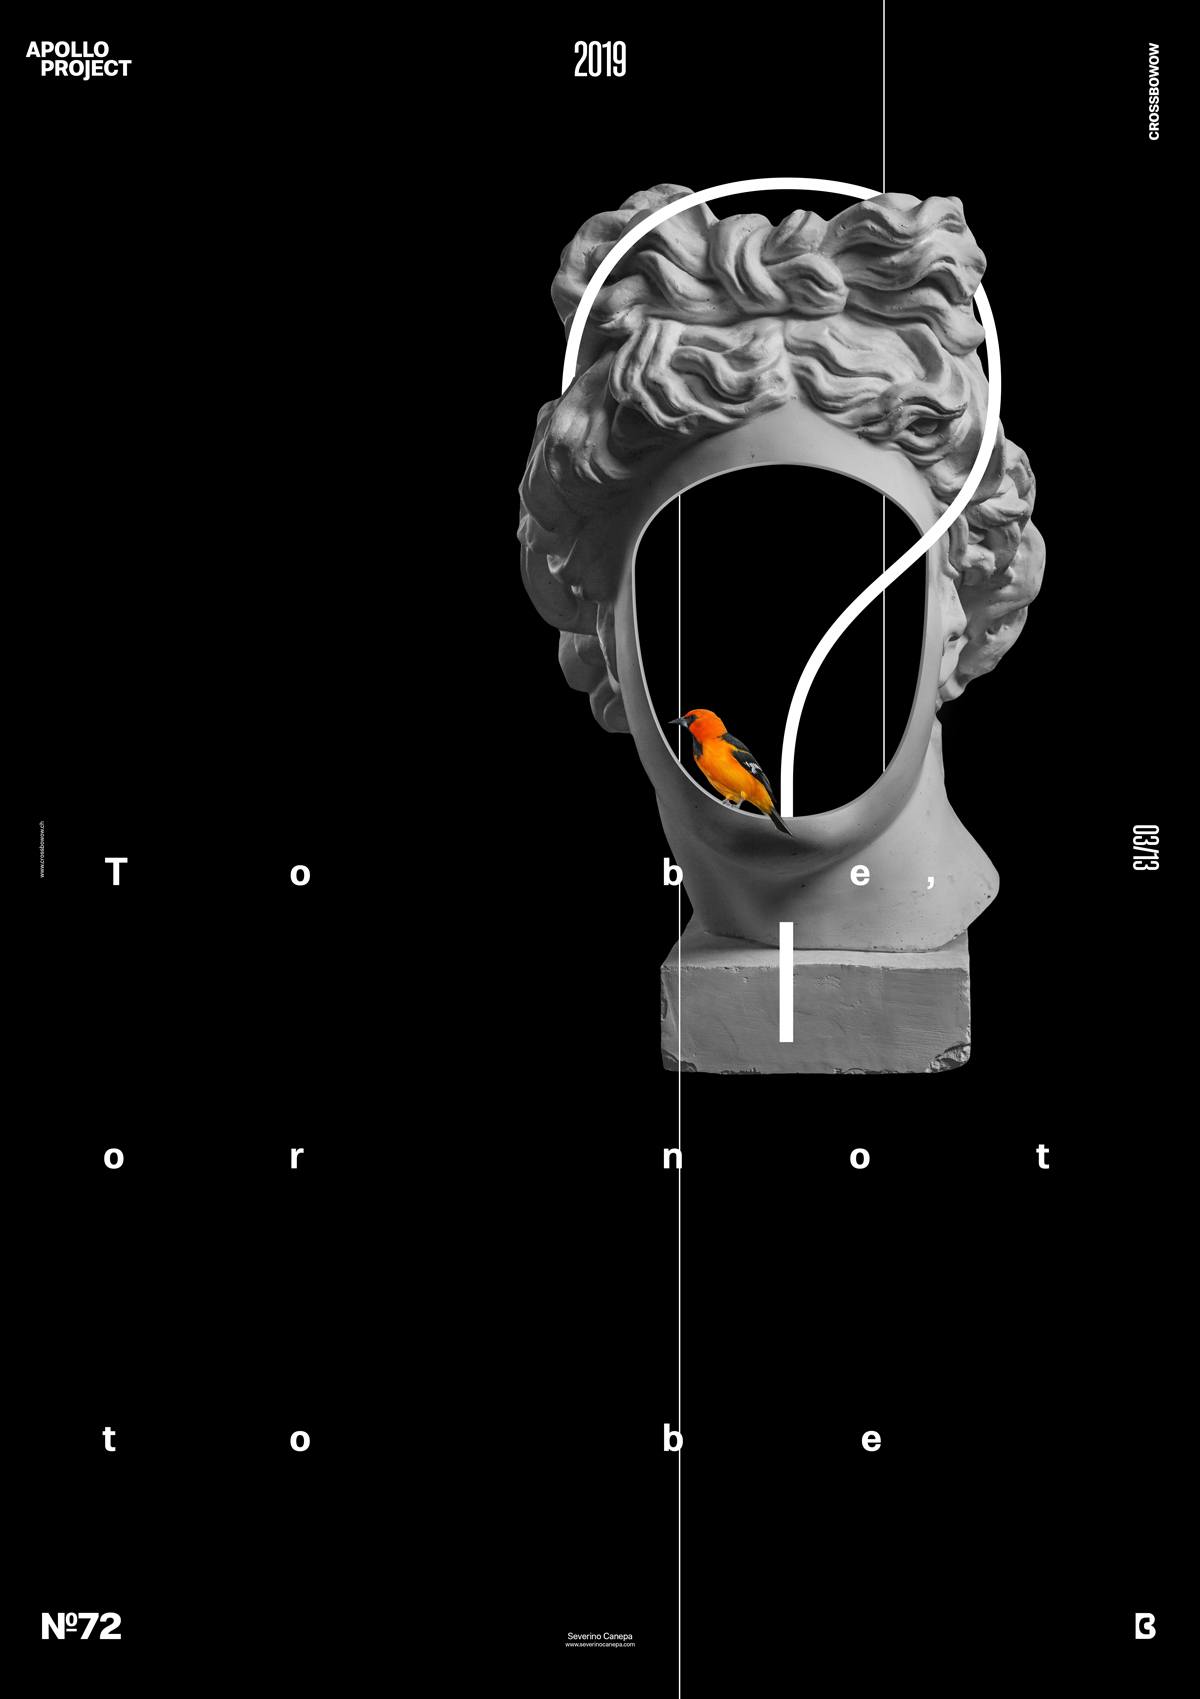 Visual of the poster design #72 titled Questions with a bird and Apollo's head